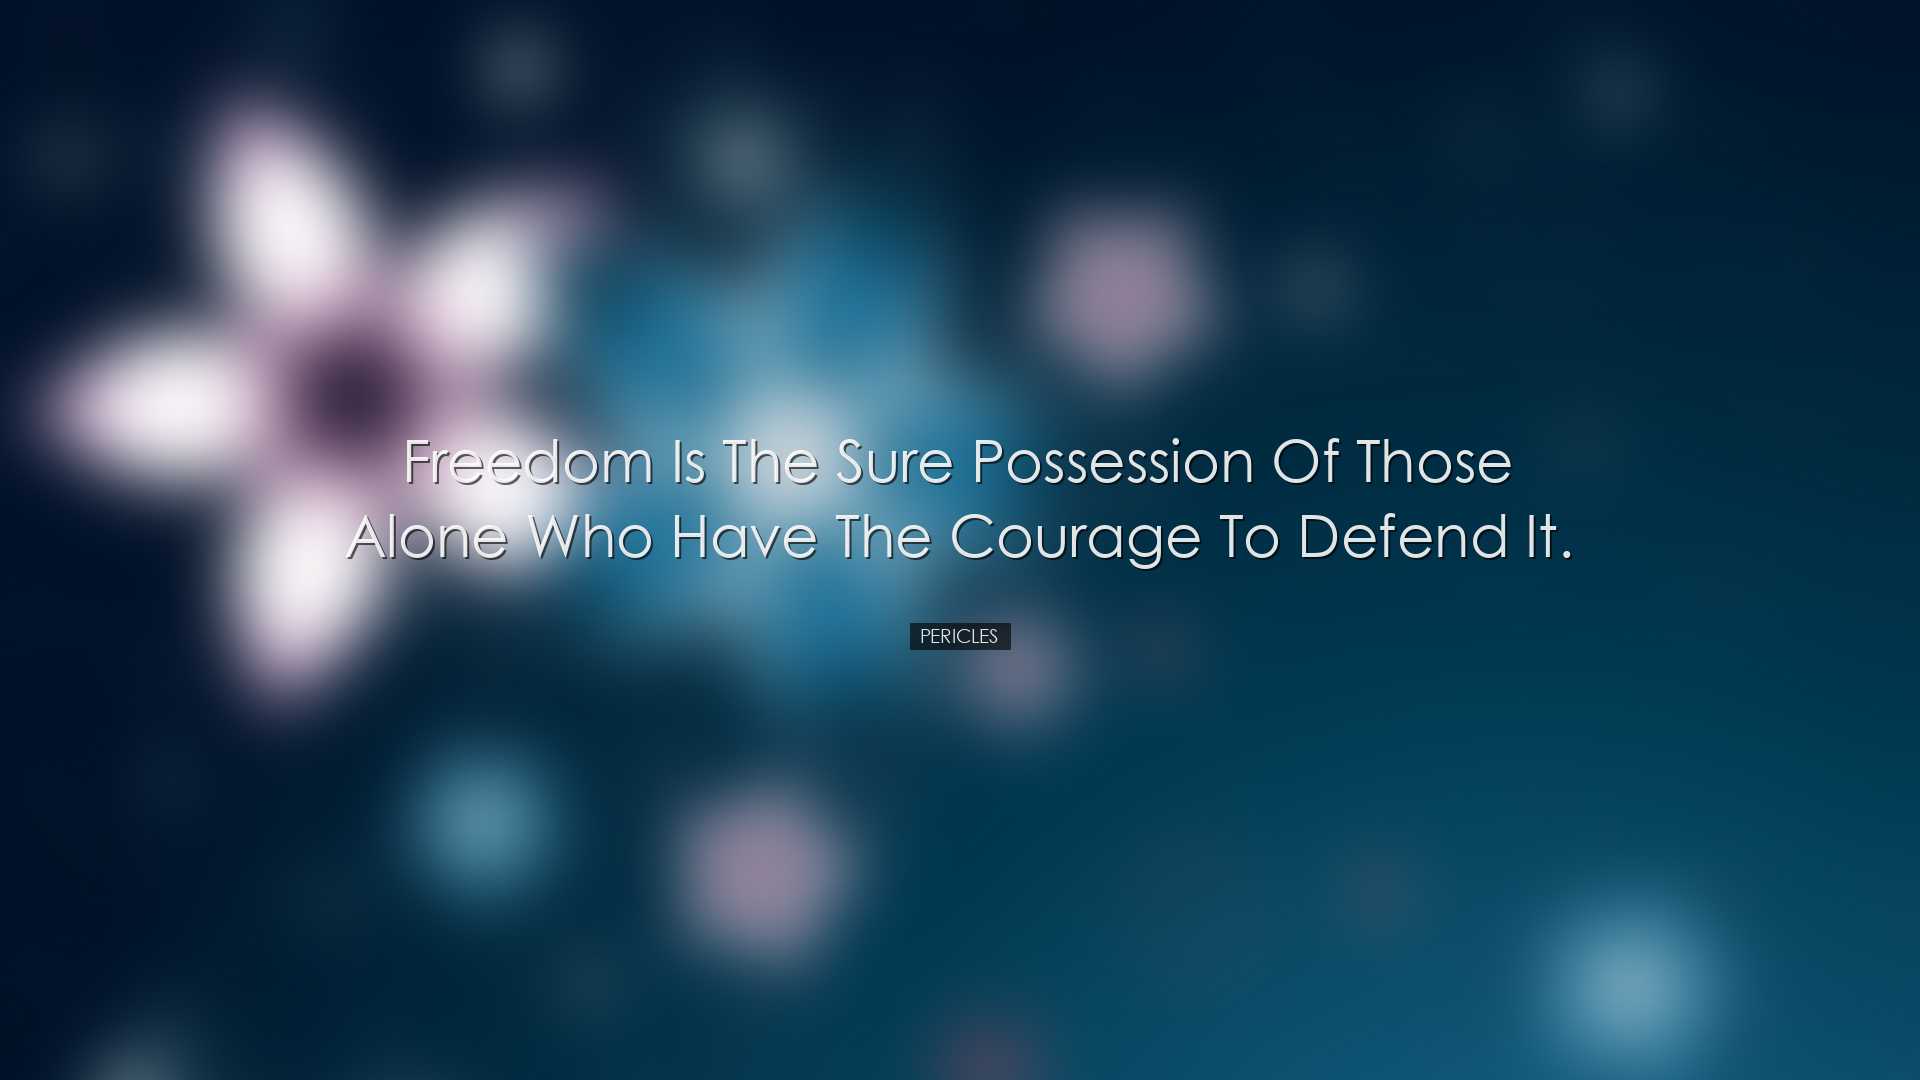 Freedom is the sure possession of those alone who have the courage